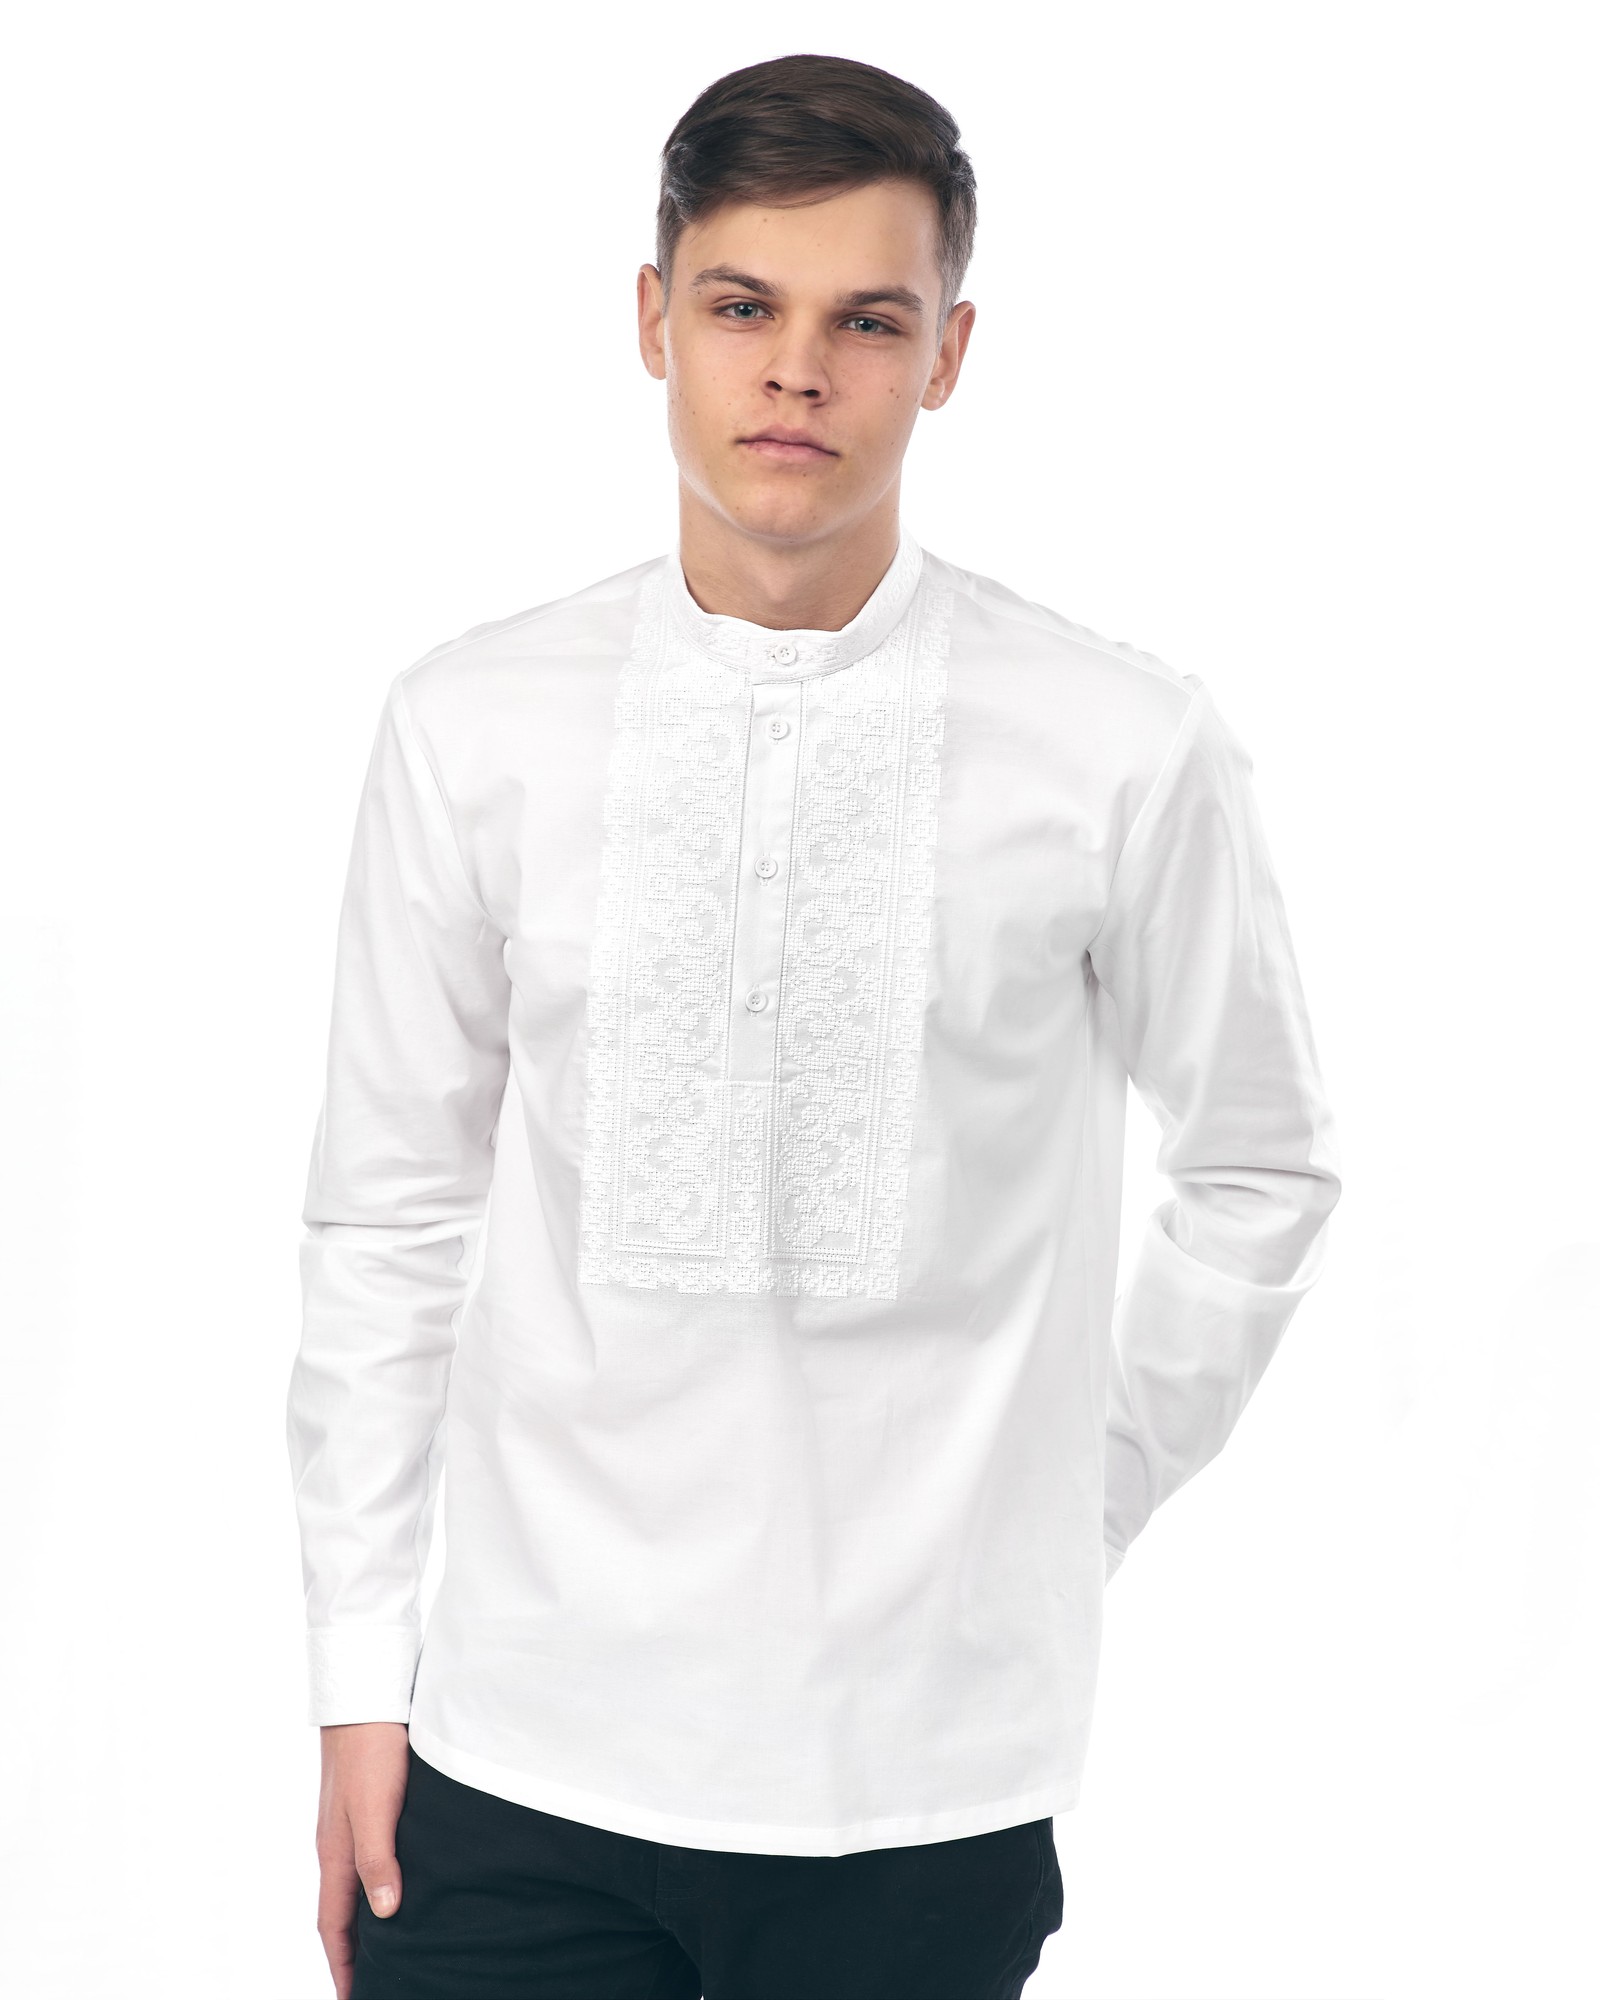 Man's embroidered blouse white 905-18/00